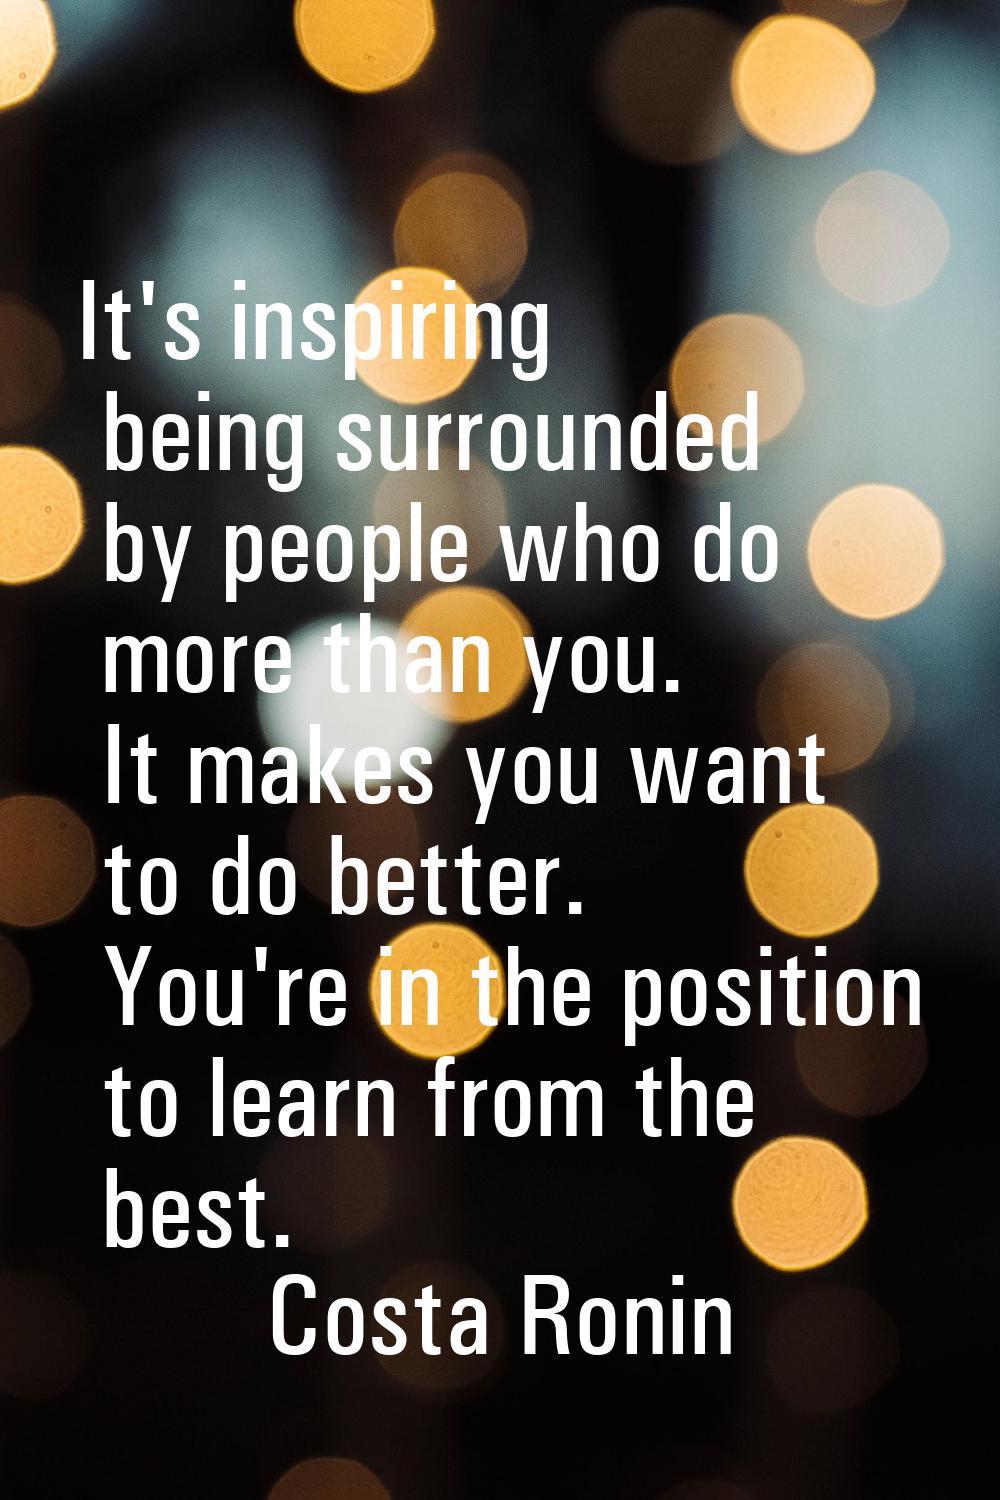 It's inspiring being surrounded by people who do more than you. It makes you want to do better. You